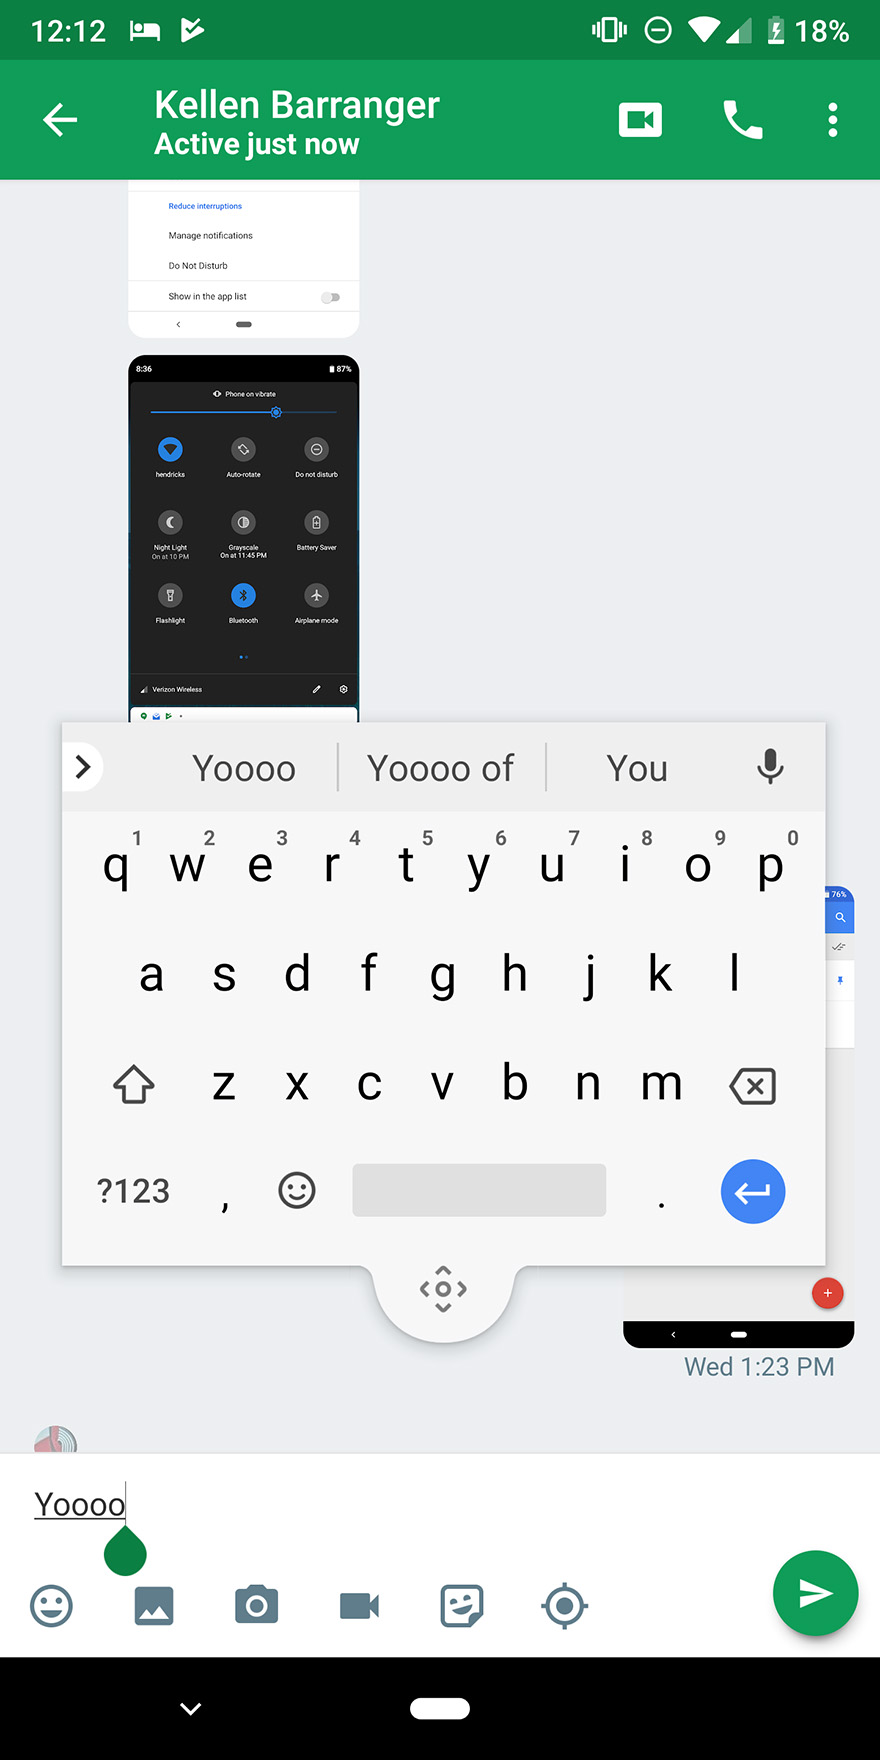 Gboard Gets a Floating Keyboard, But It Might Not be Ready Yet